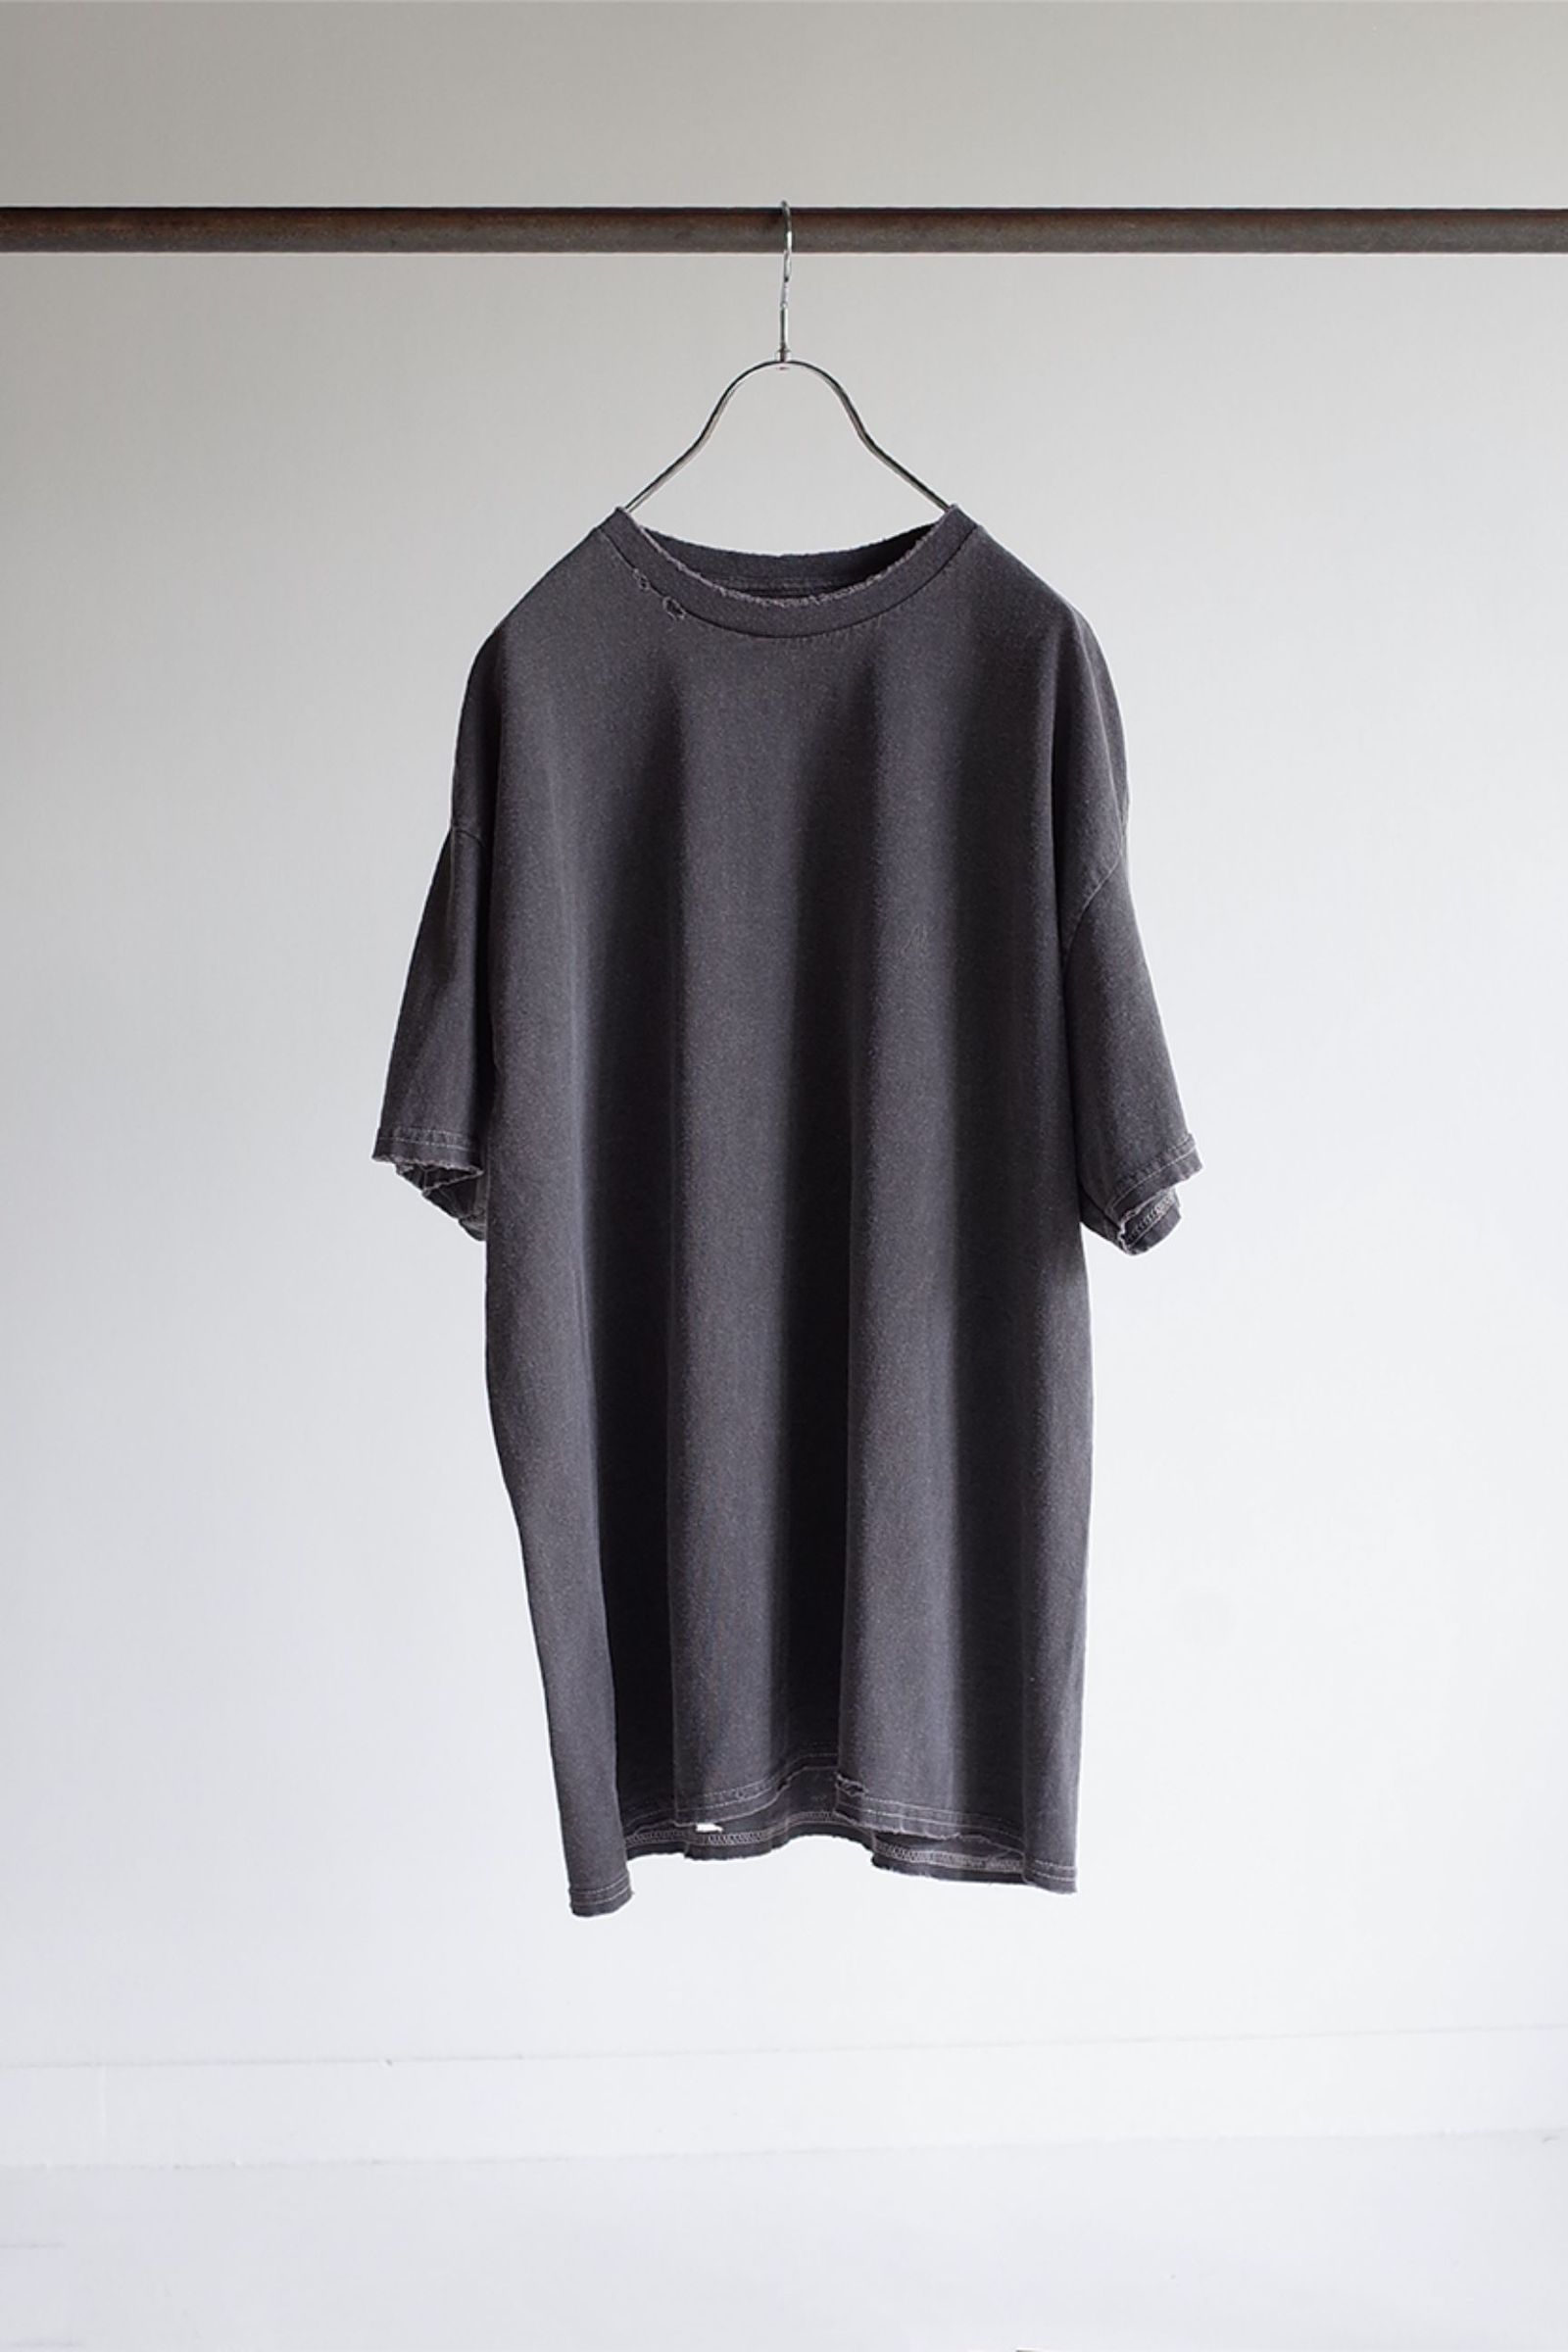 ANCELLM - 【再入荷】EMBROIDERY DYED T-SHIRT/F.BLACK | NapsNote